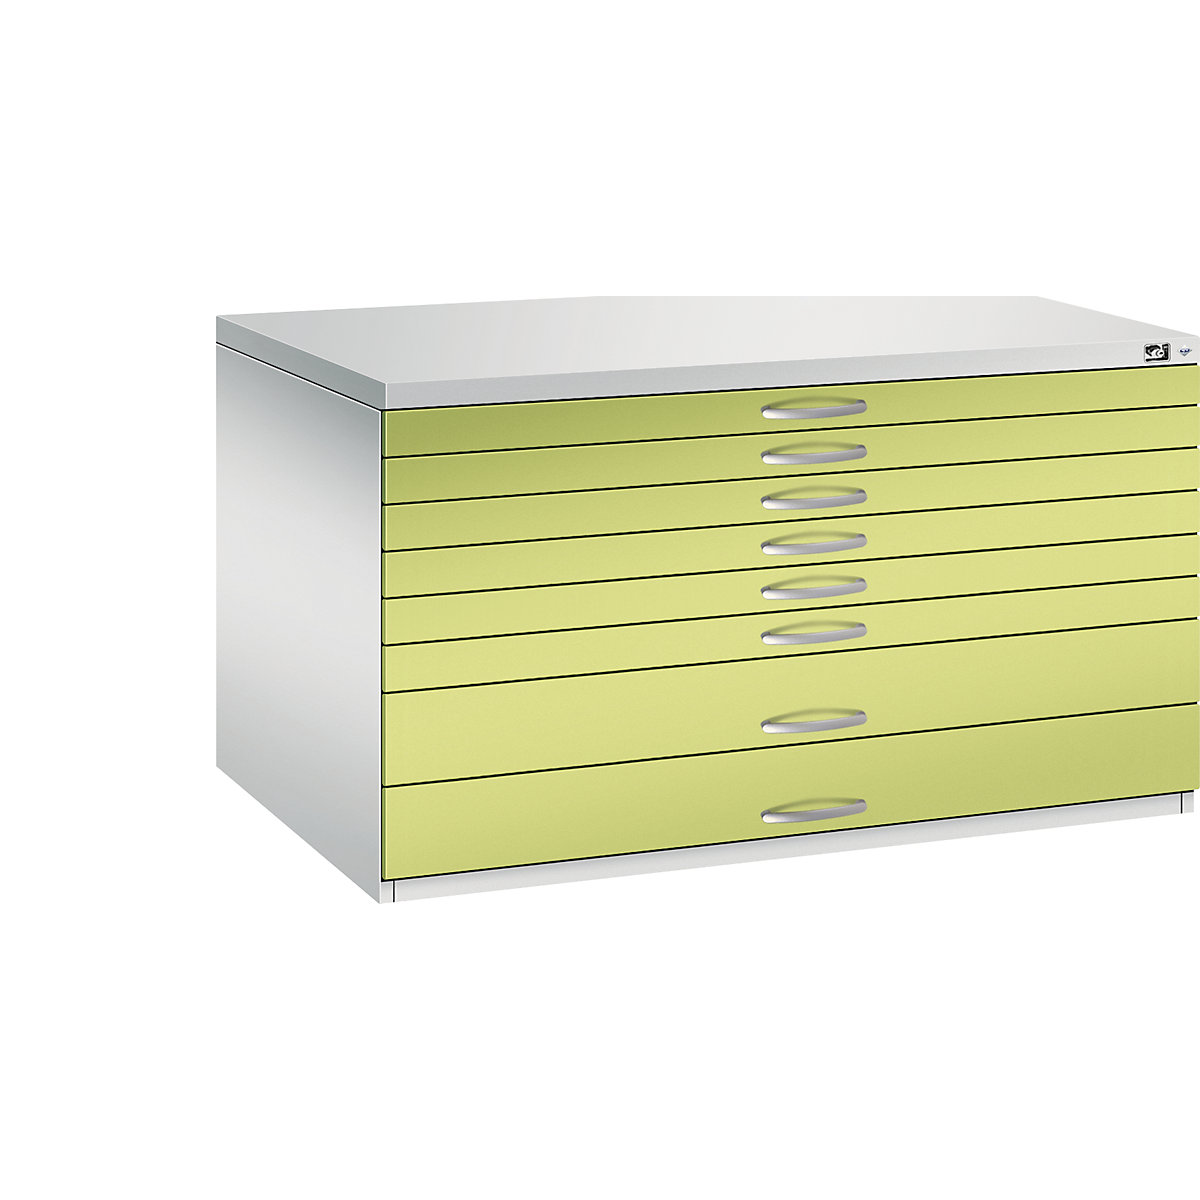 Drawing cabinet – C+P, A0, 8 drawers, height 760 mm, light grey / viridian green-19